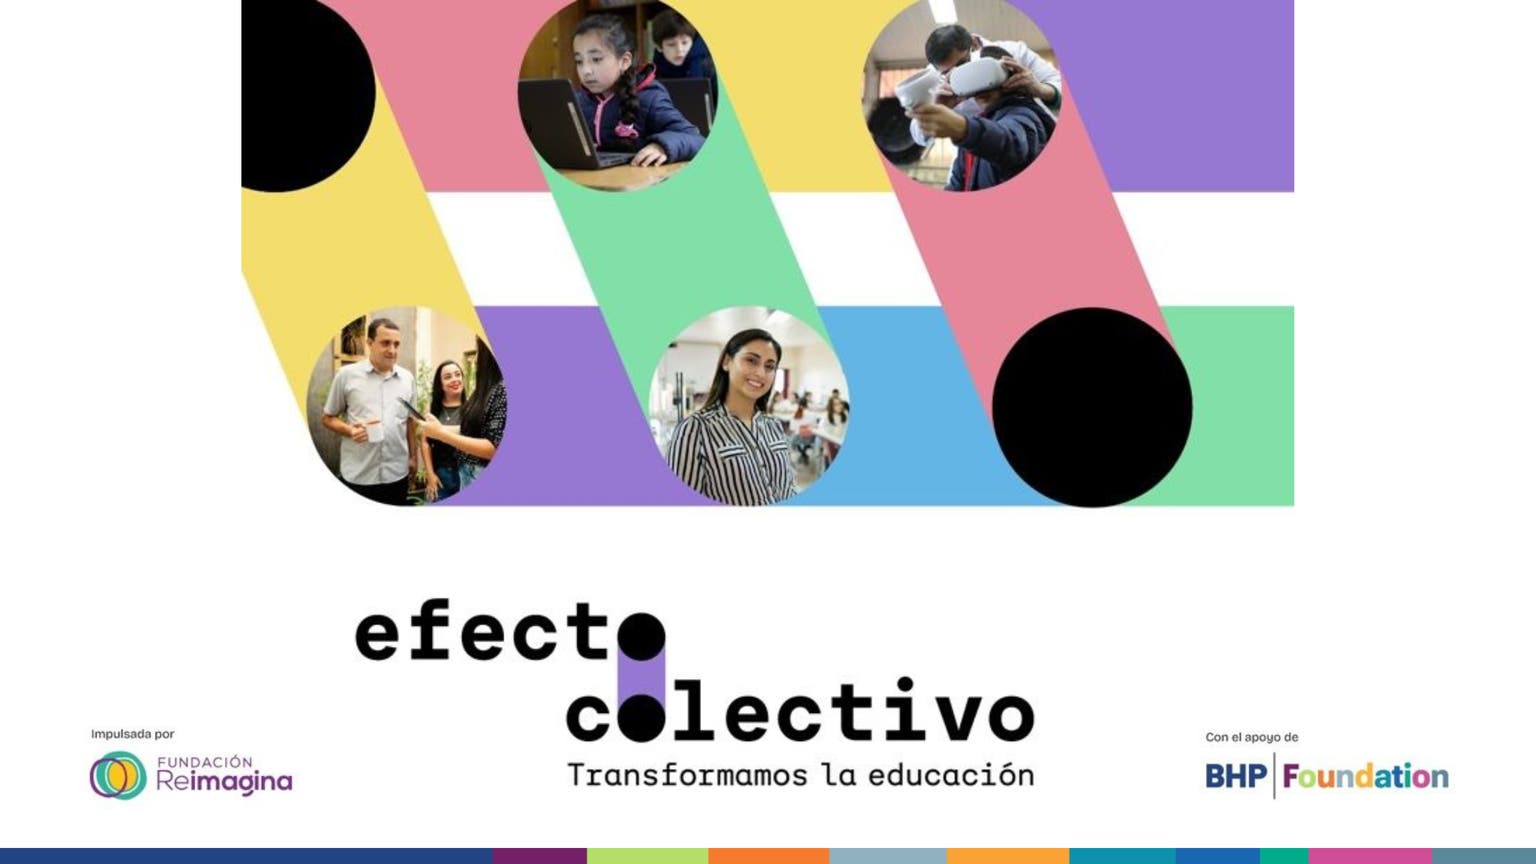 Chile_Efecto_Colectivo_Colllective_Effect_BHP_Foundation2.png